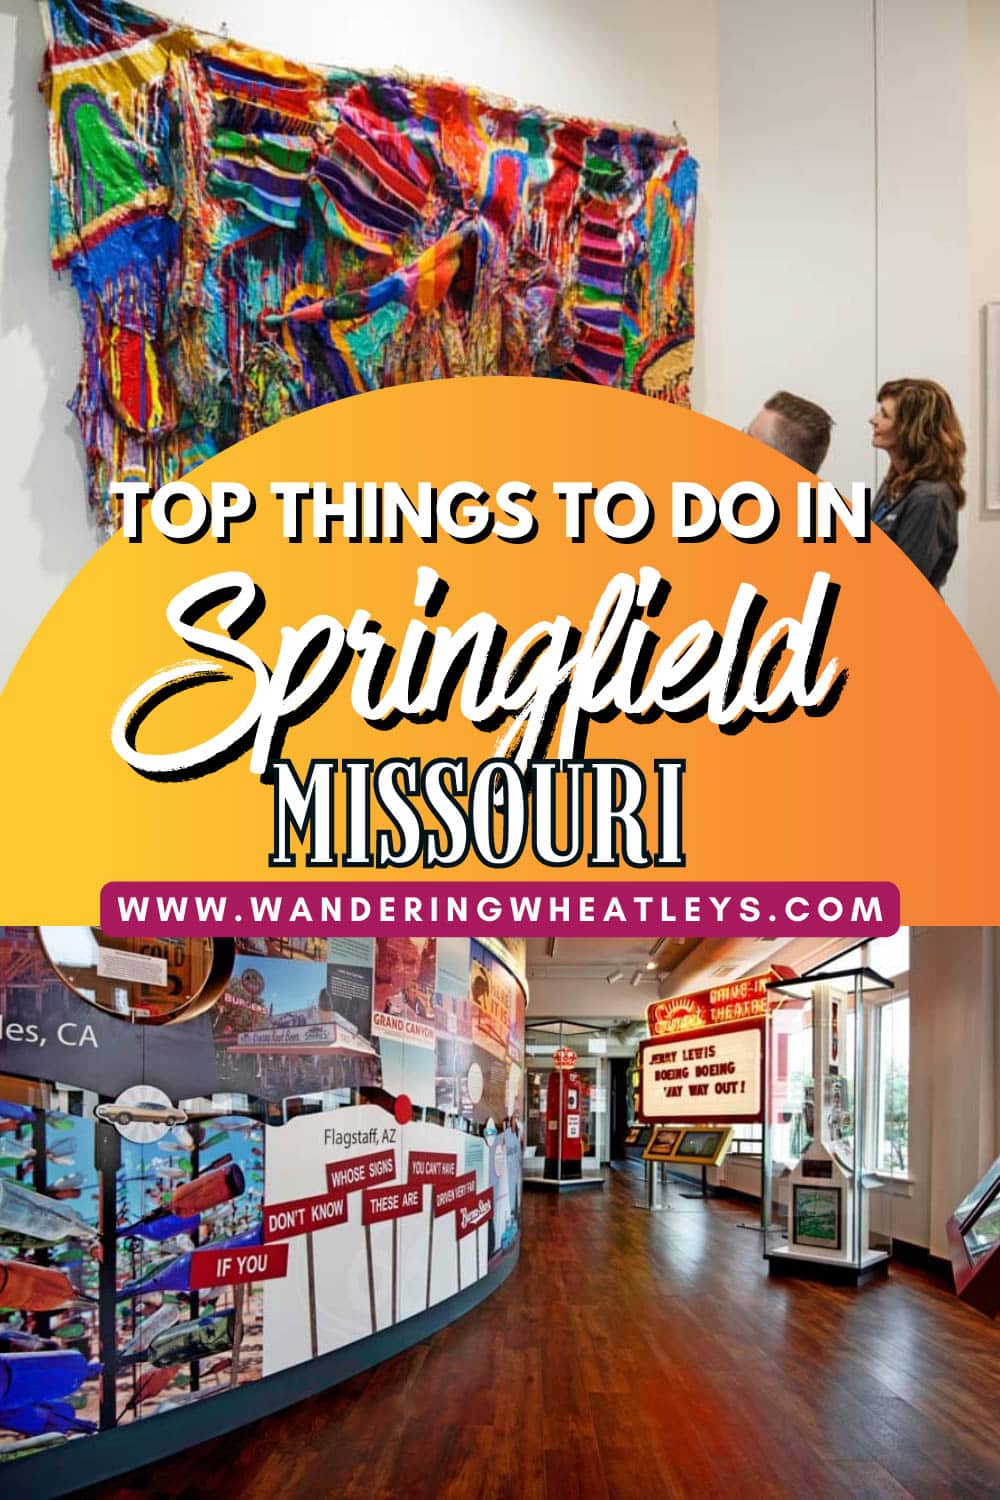 20 Top Things to Do in Springfield, Missouri